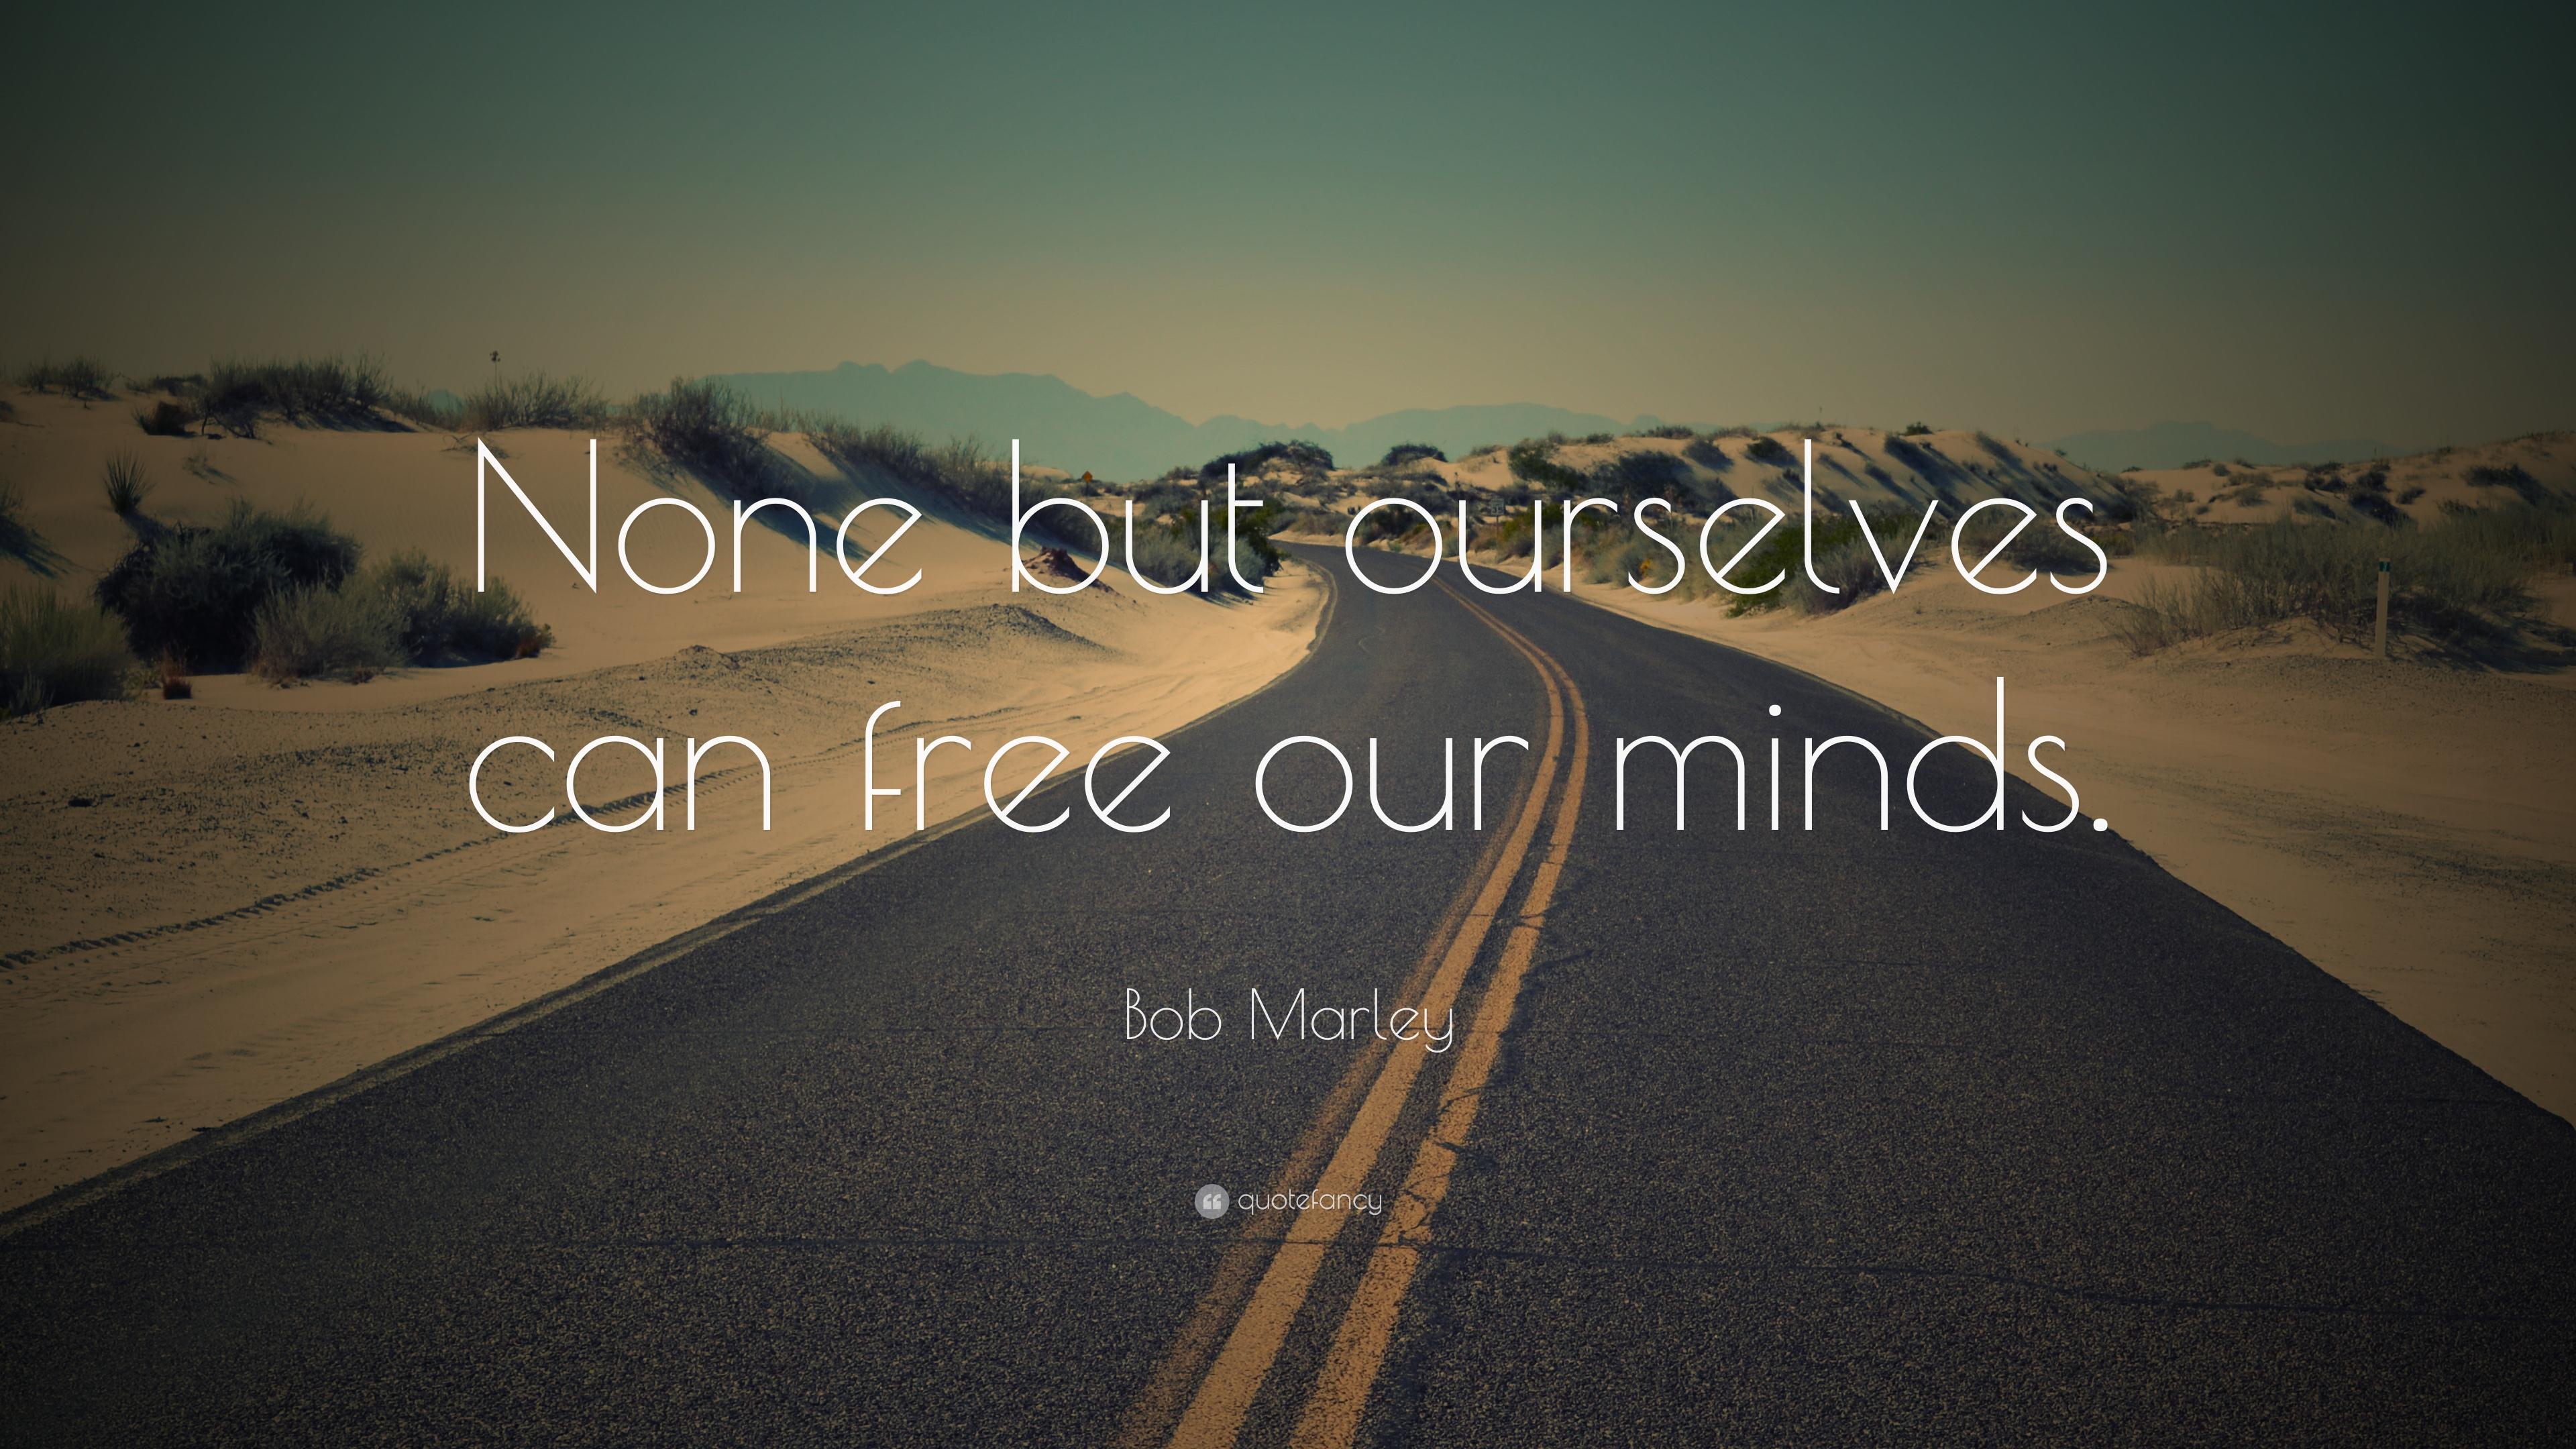 Bob Marley Quote: “None but ourselves can free our minds.” 24